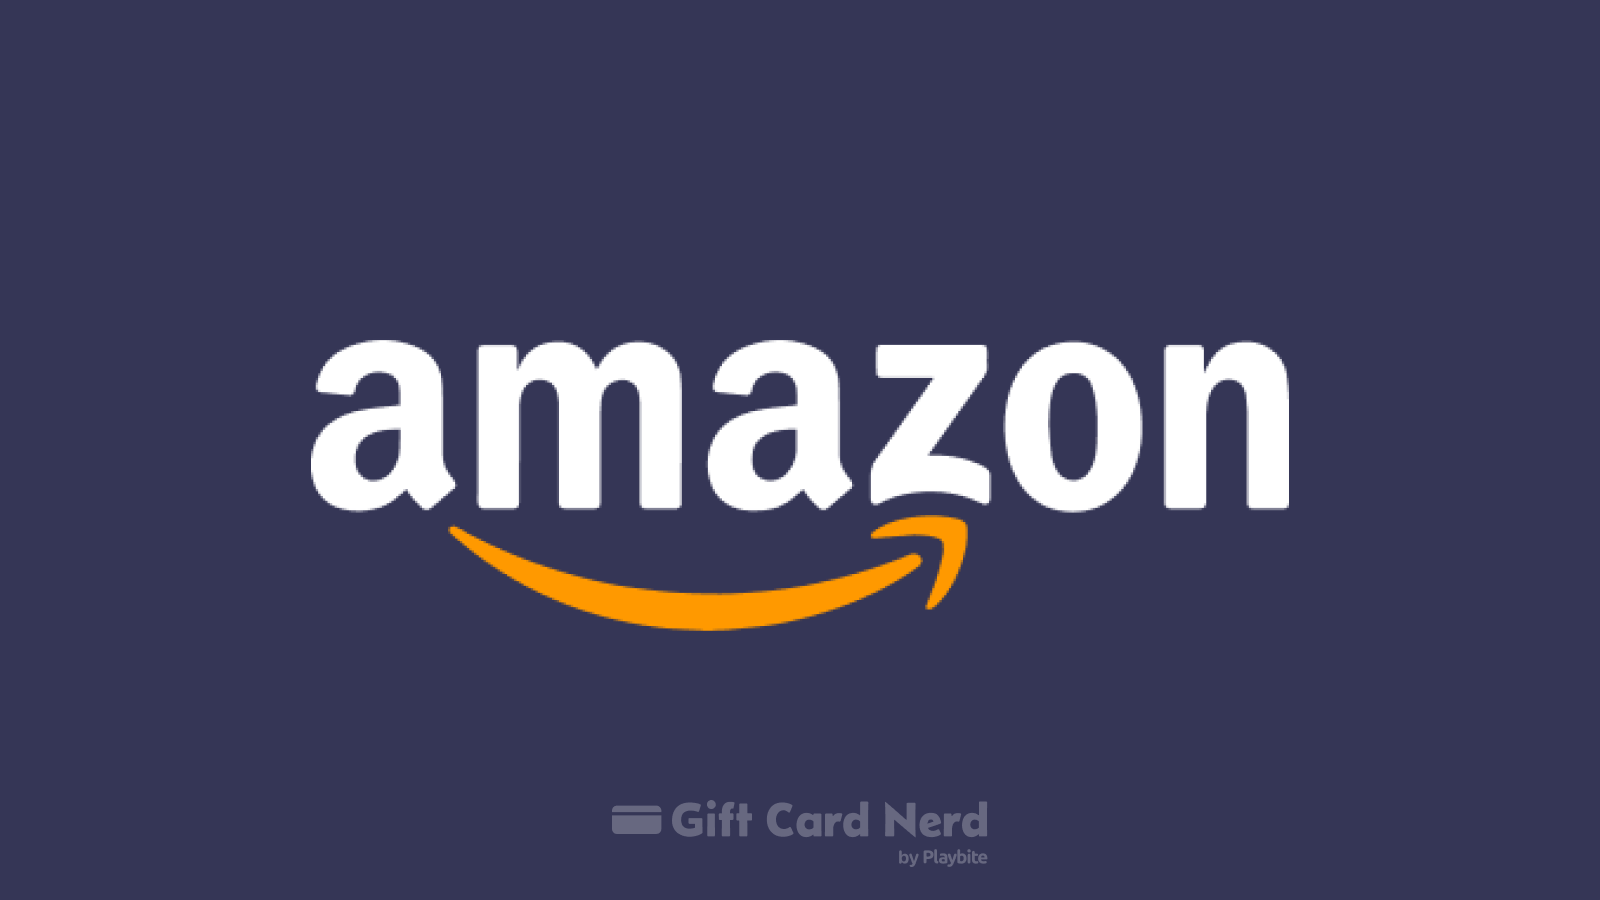 Does Walmart sell Amazon gift cards?